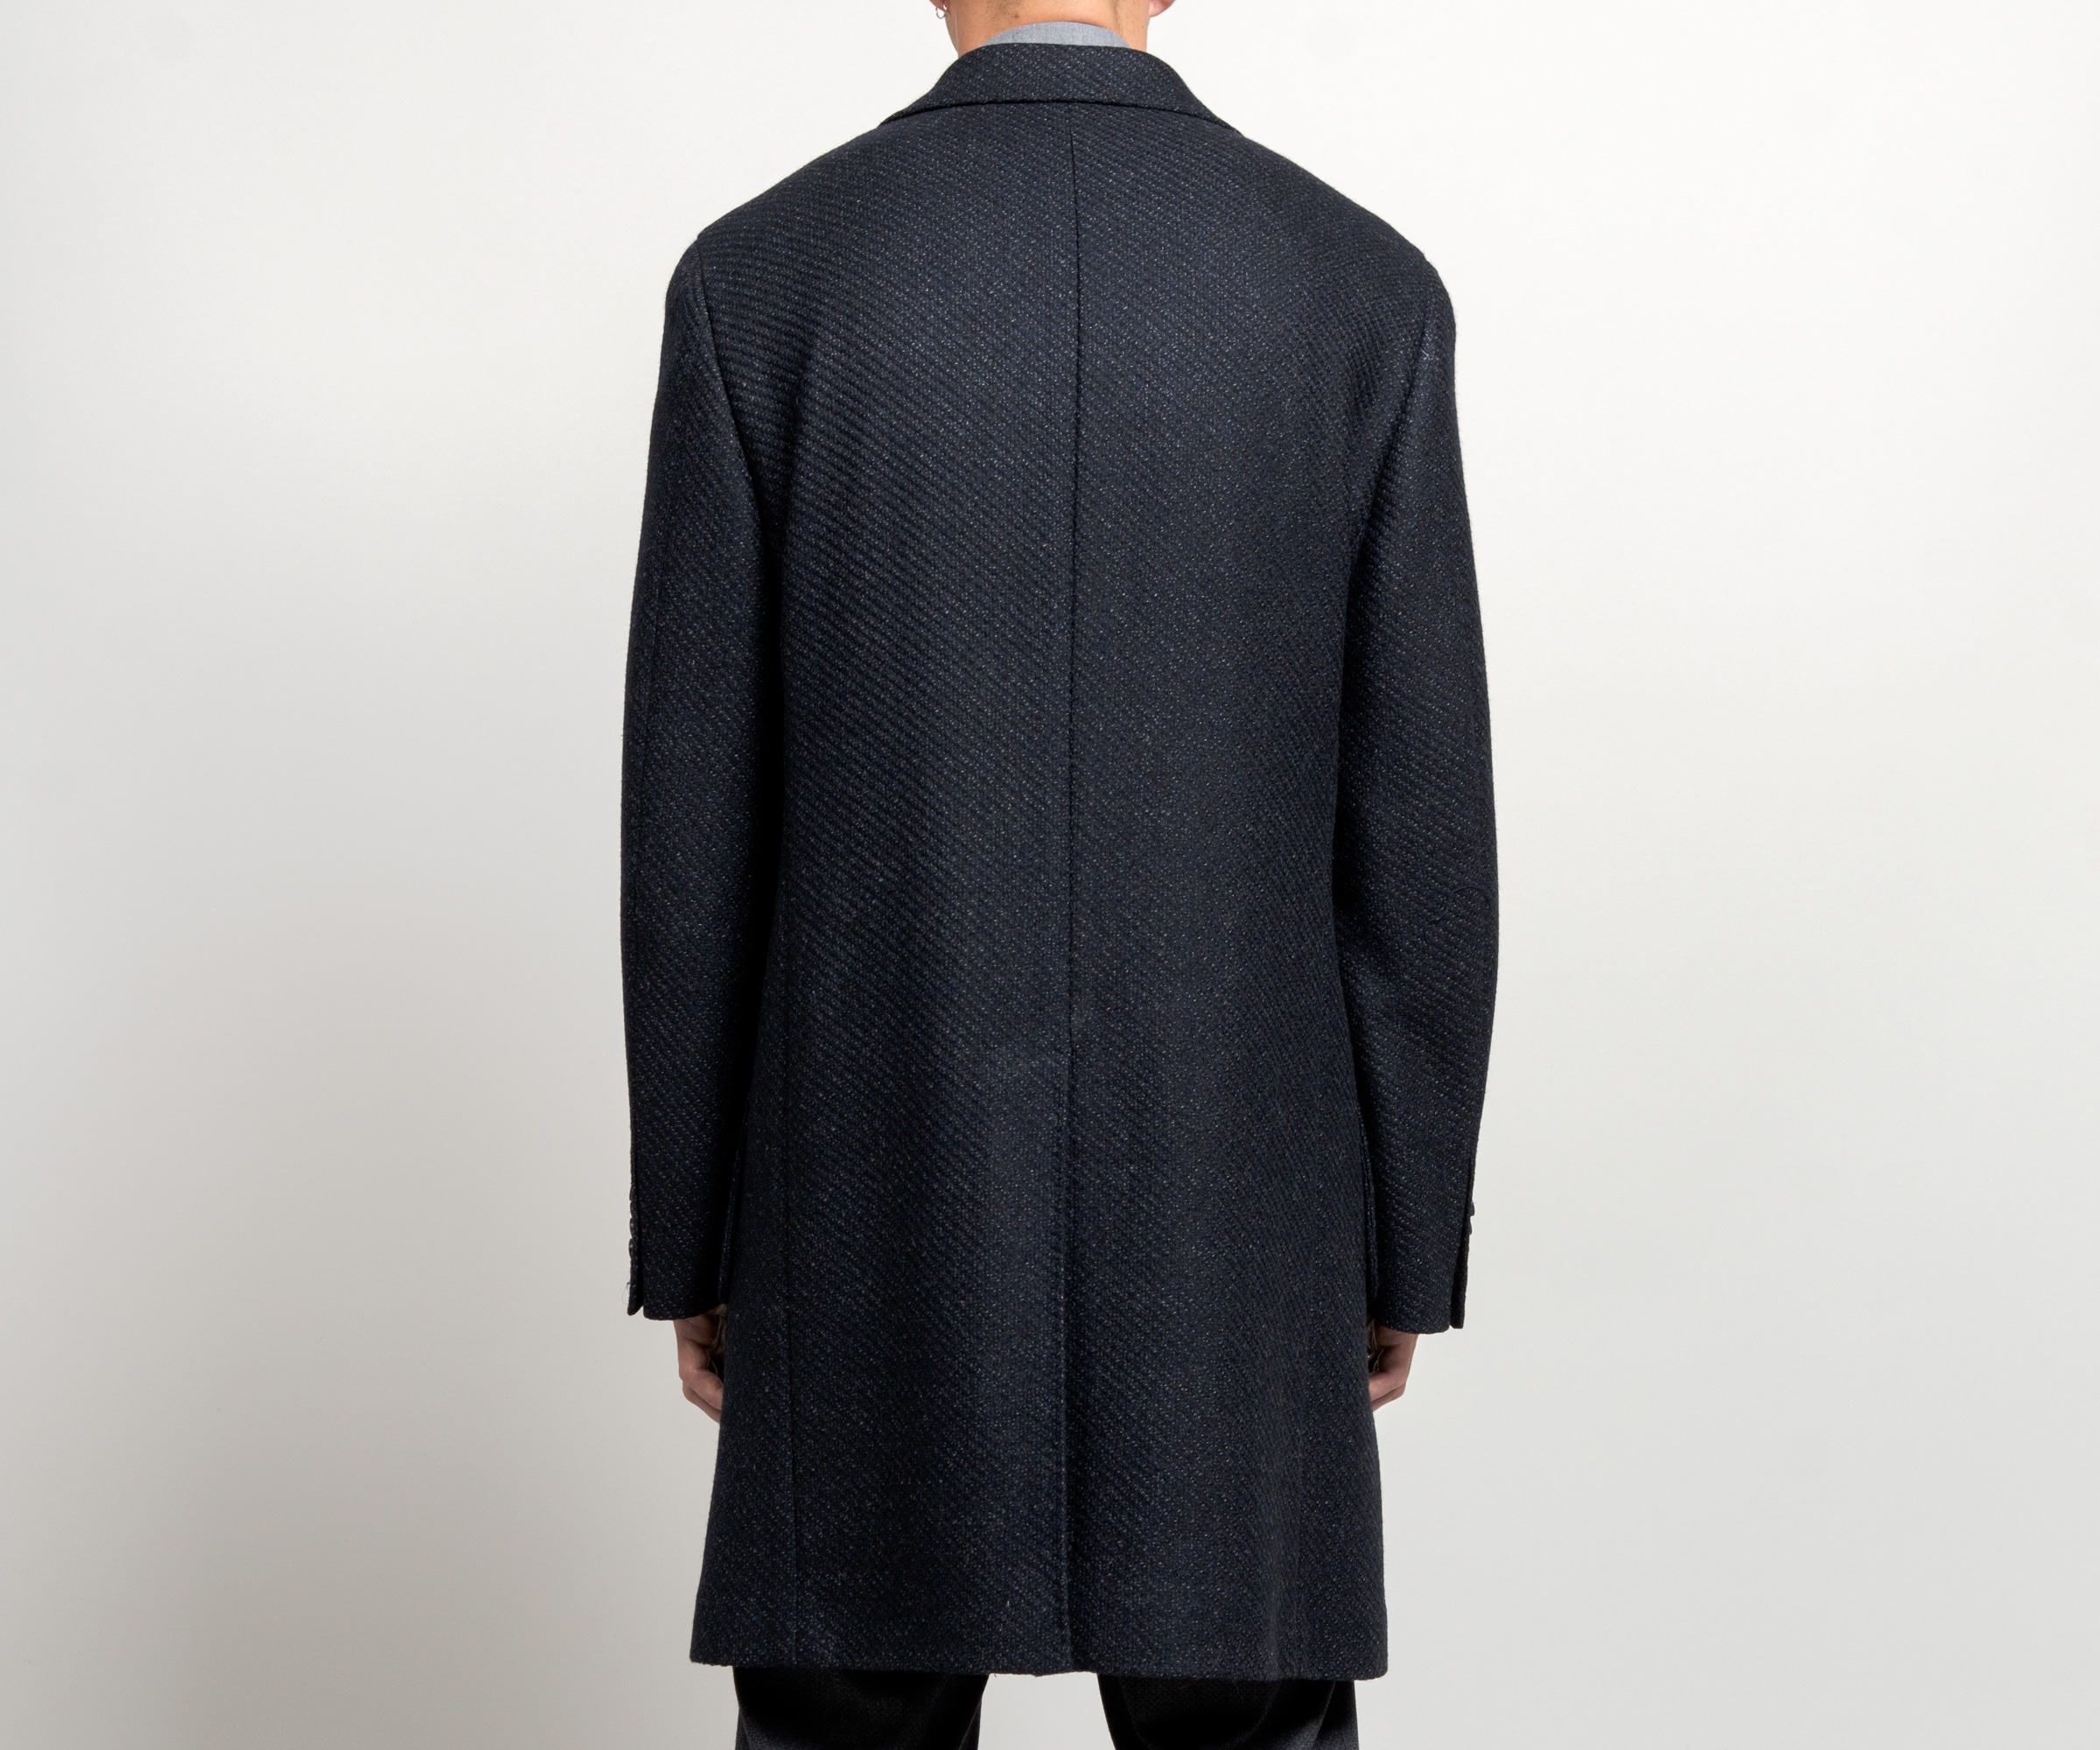 Canali 'Kei' Speckled Detail Overcoat Navy